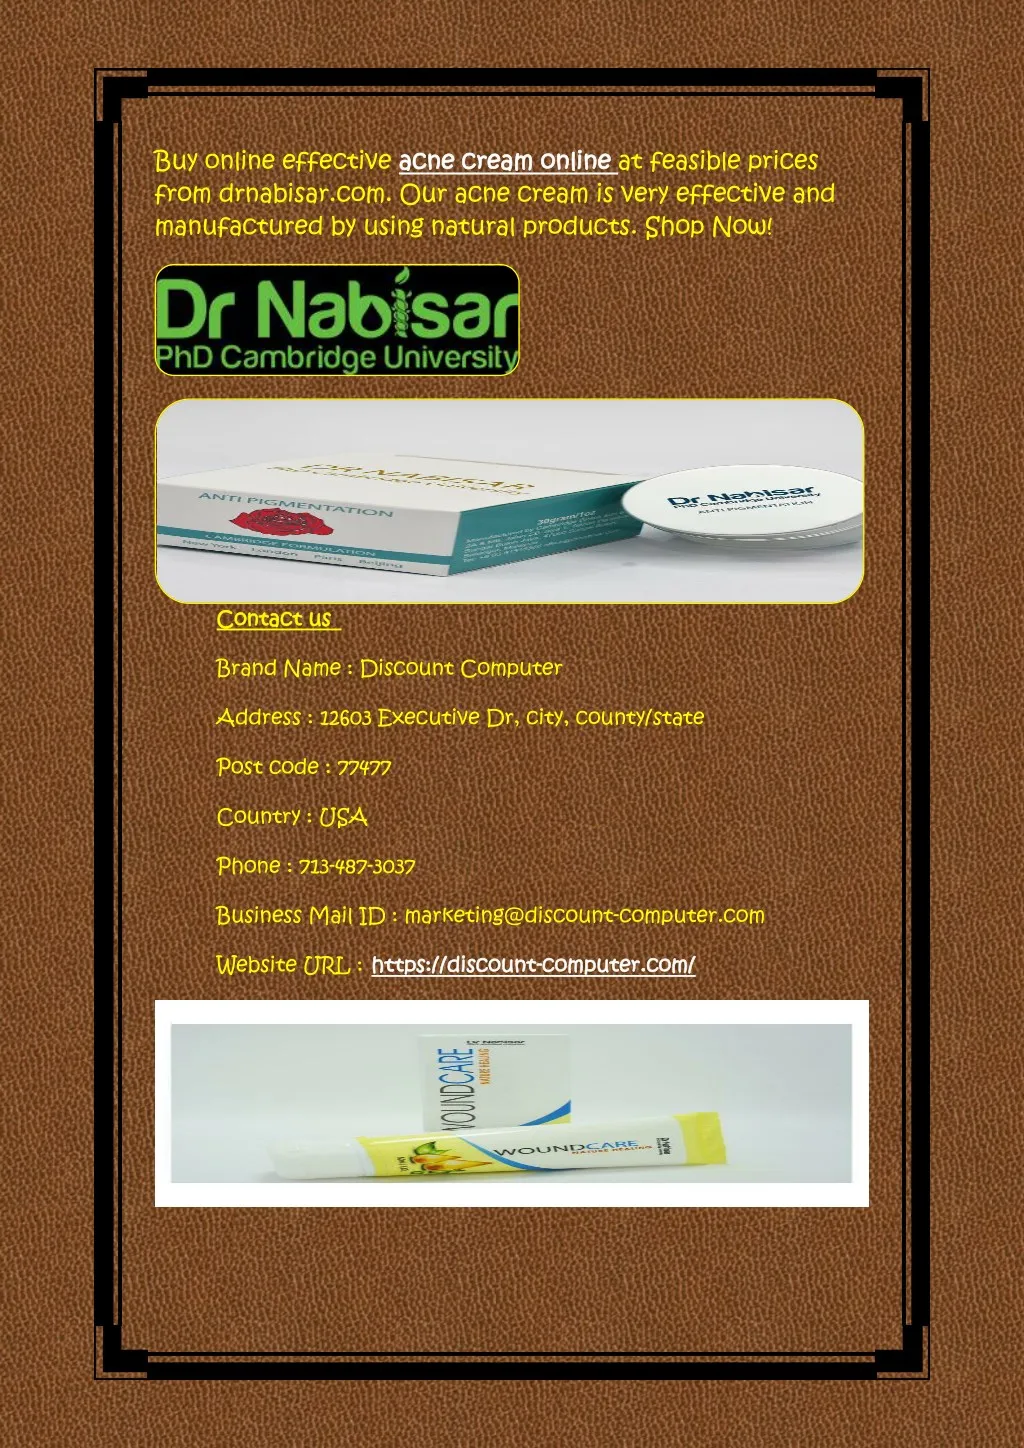 buy online effective acne from drnabisar n.